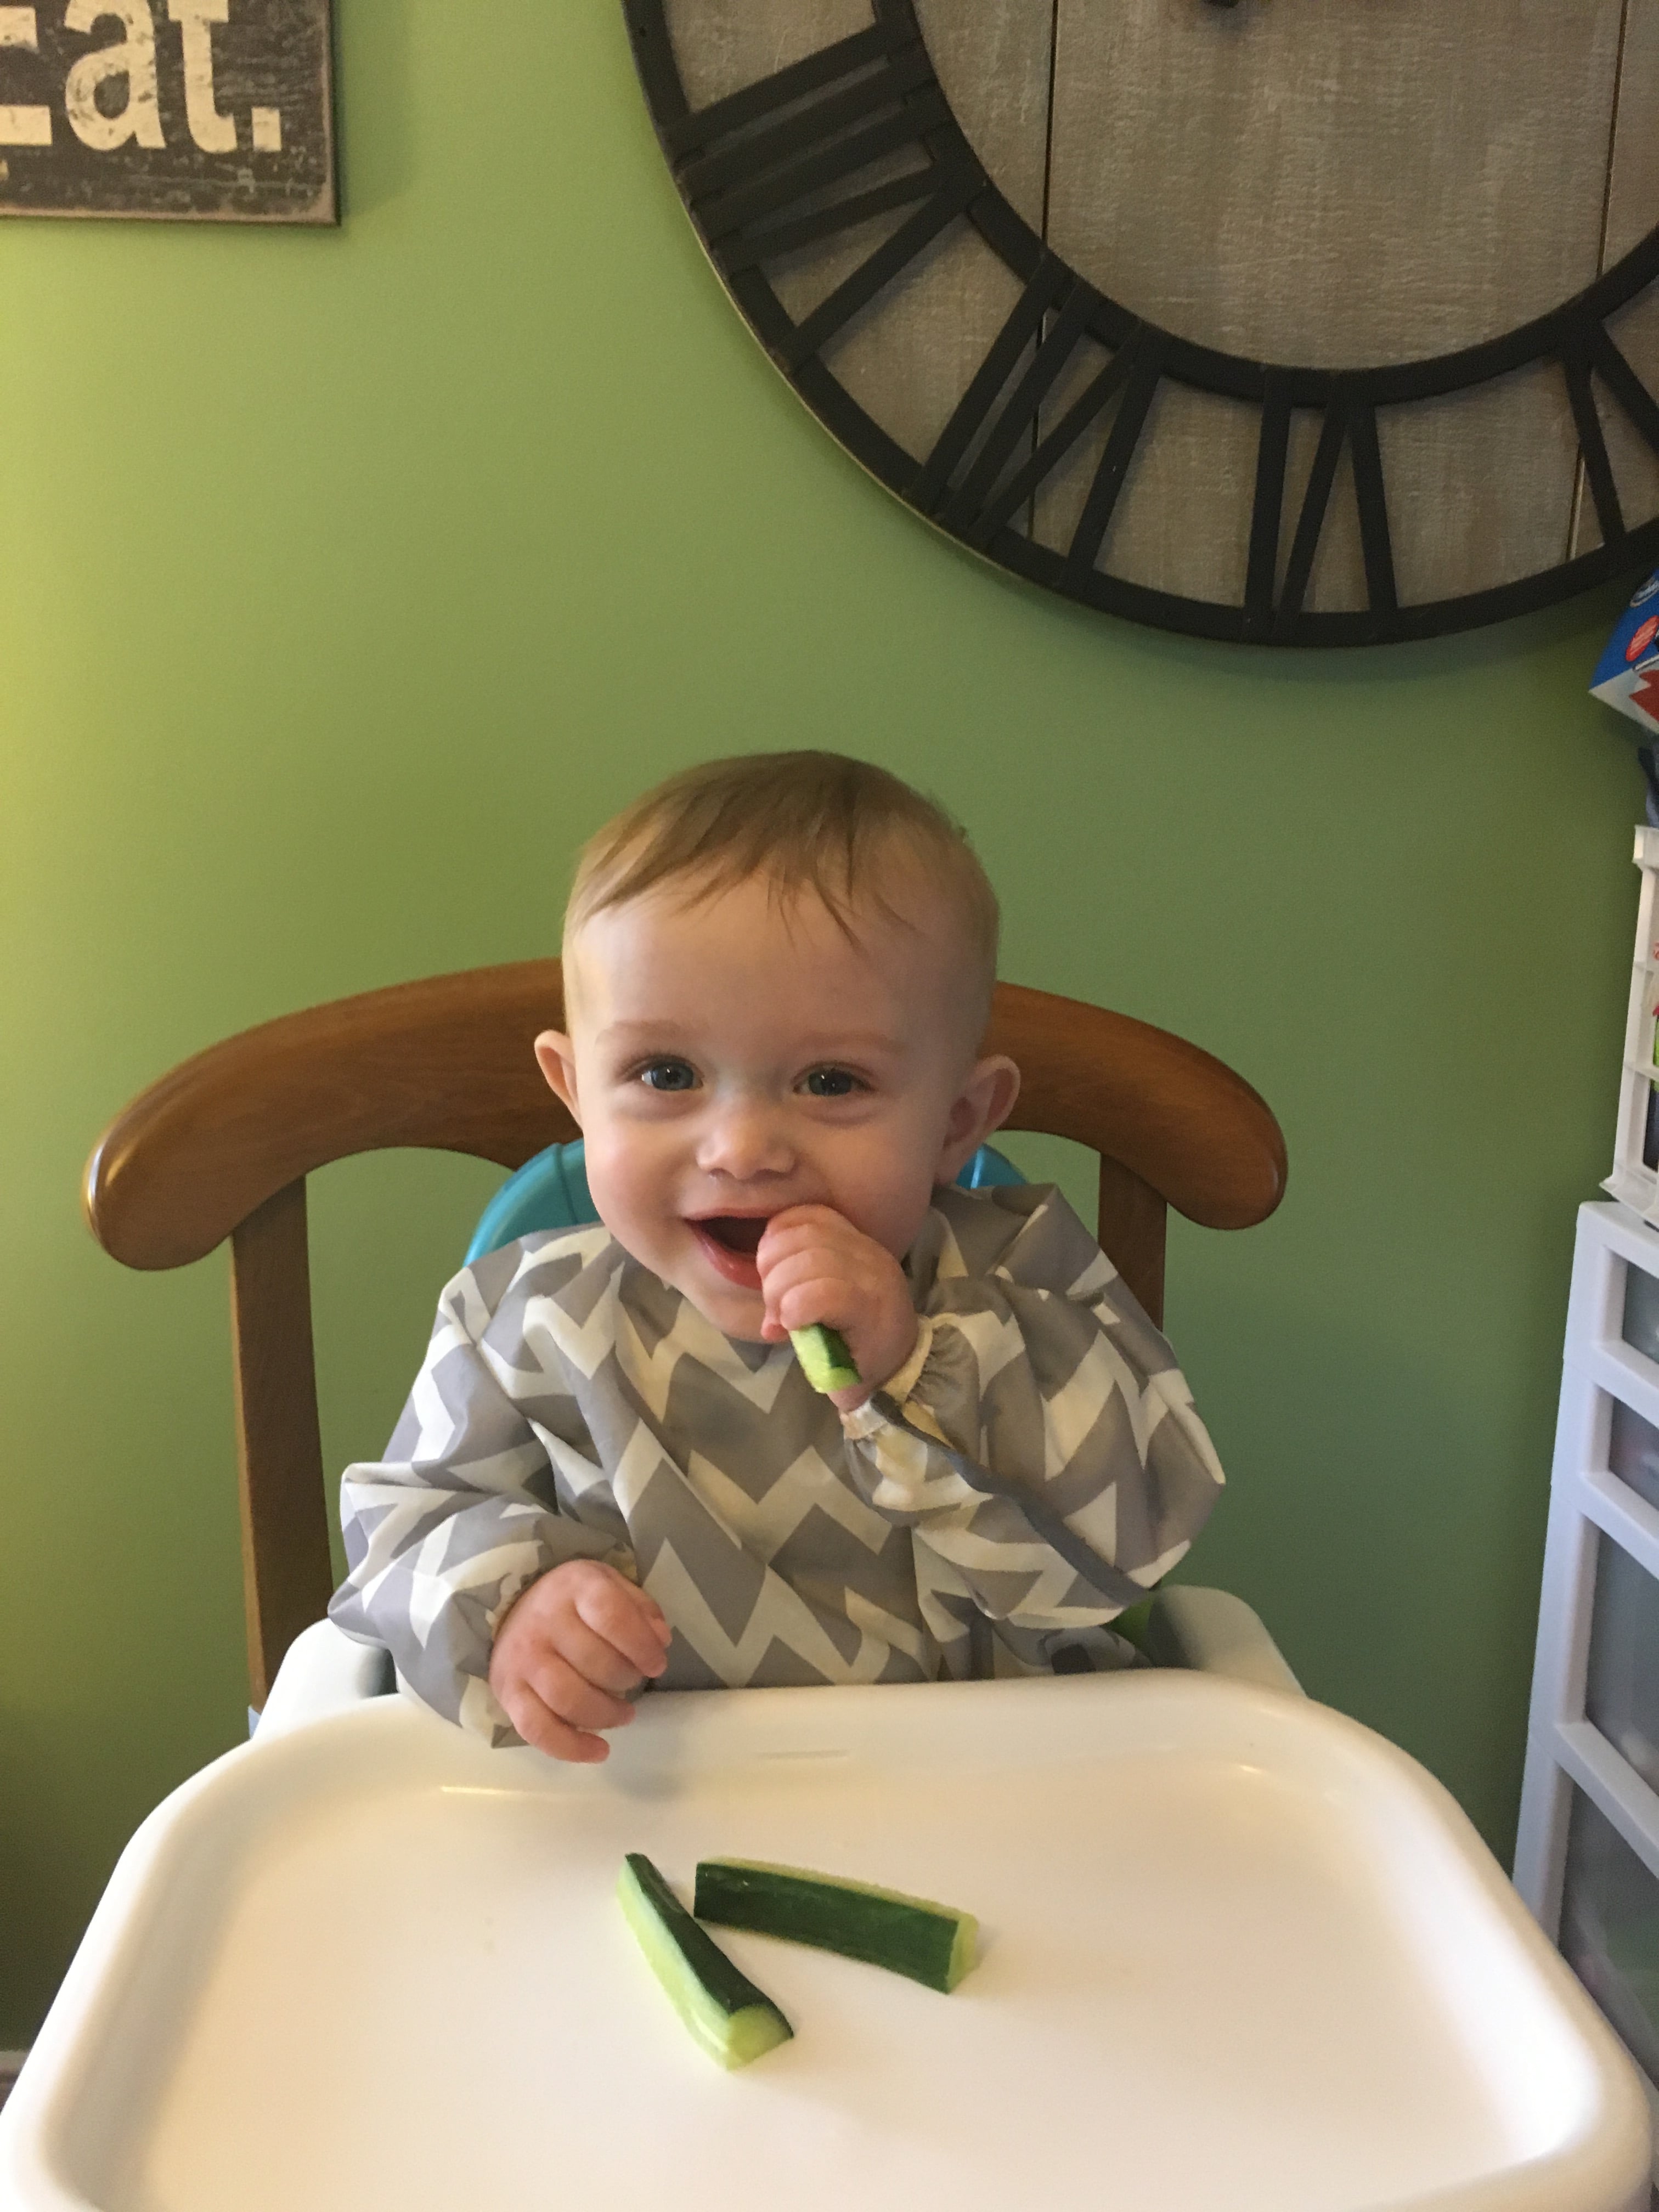 Baby Led Weaning Gear - This FamiLee